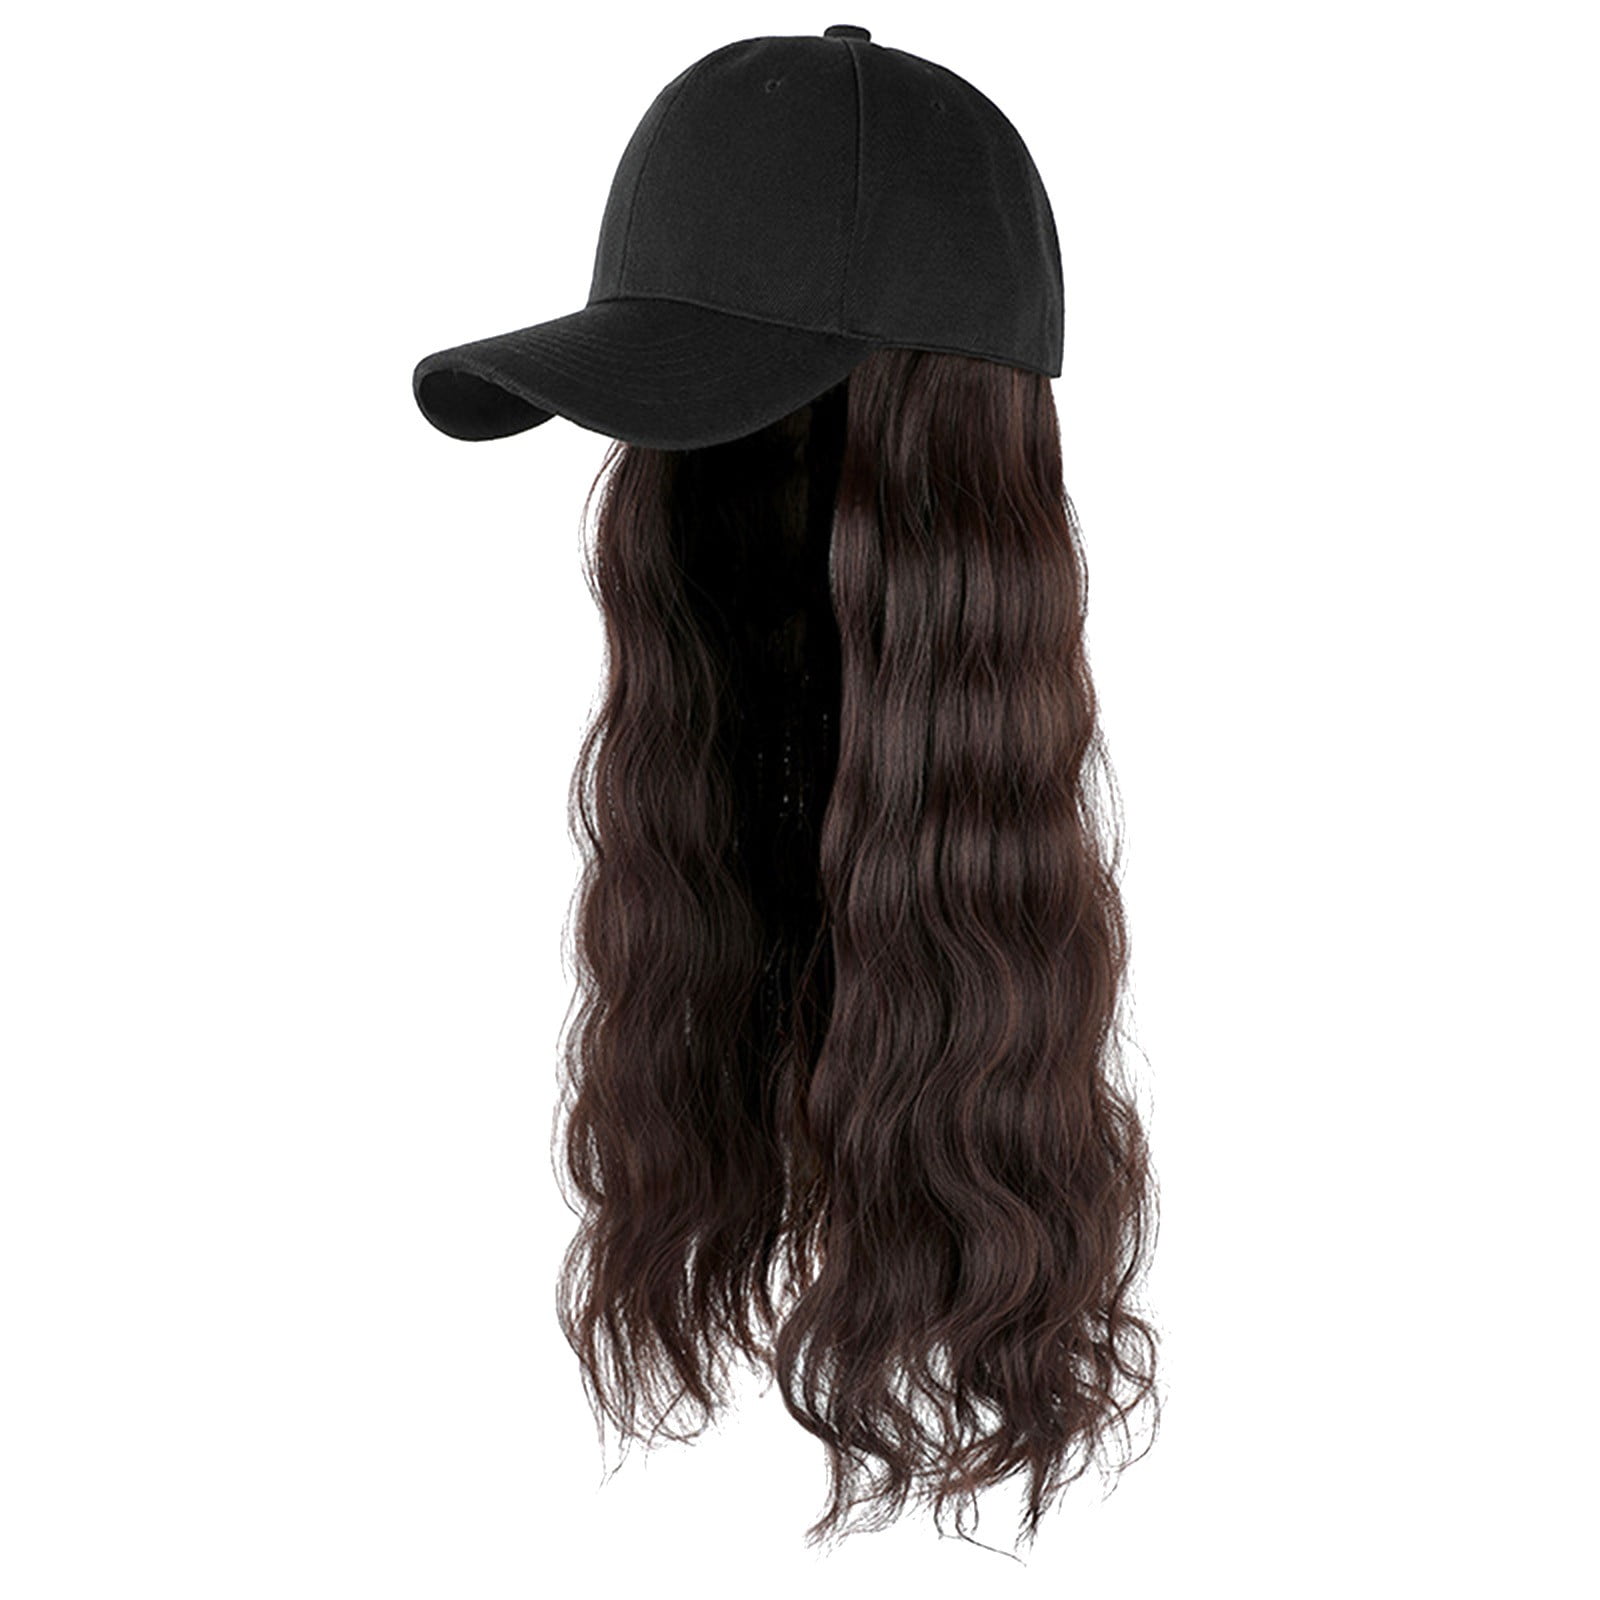 long hair wig hat attached adjustable curly baseball wave cap hair ...